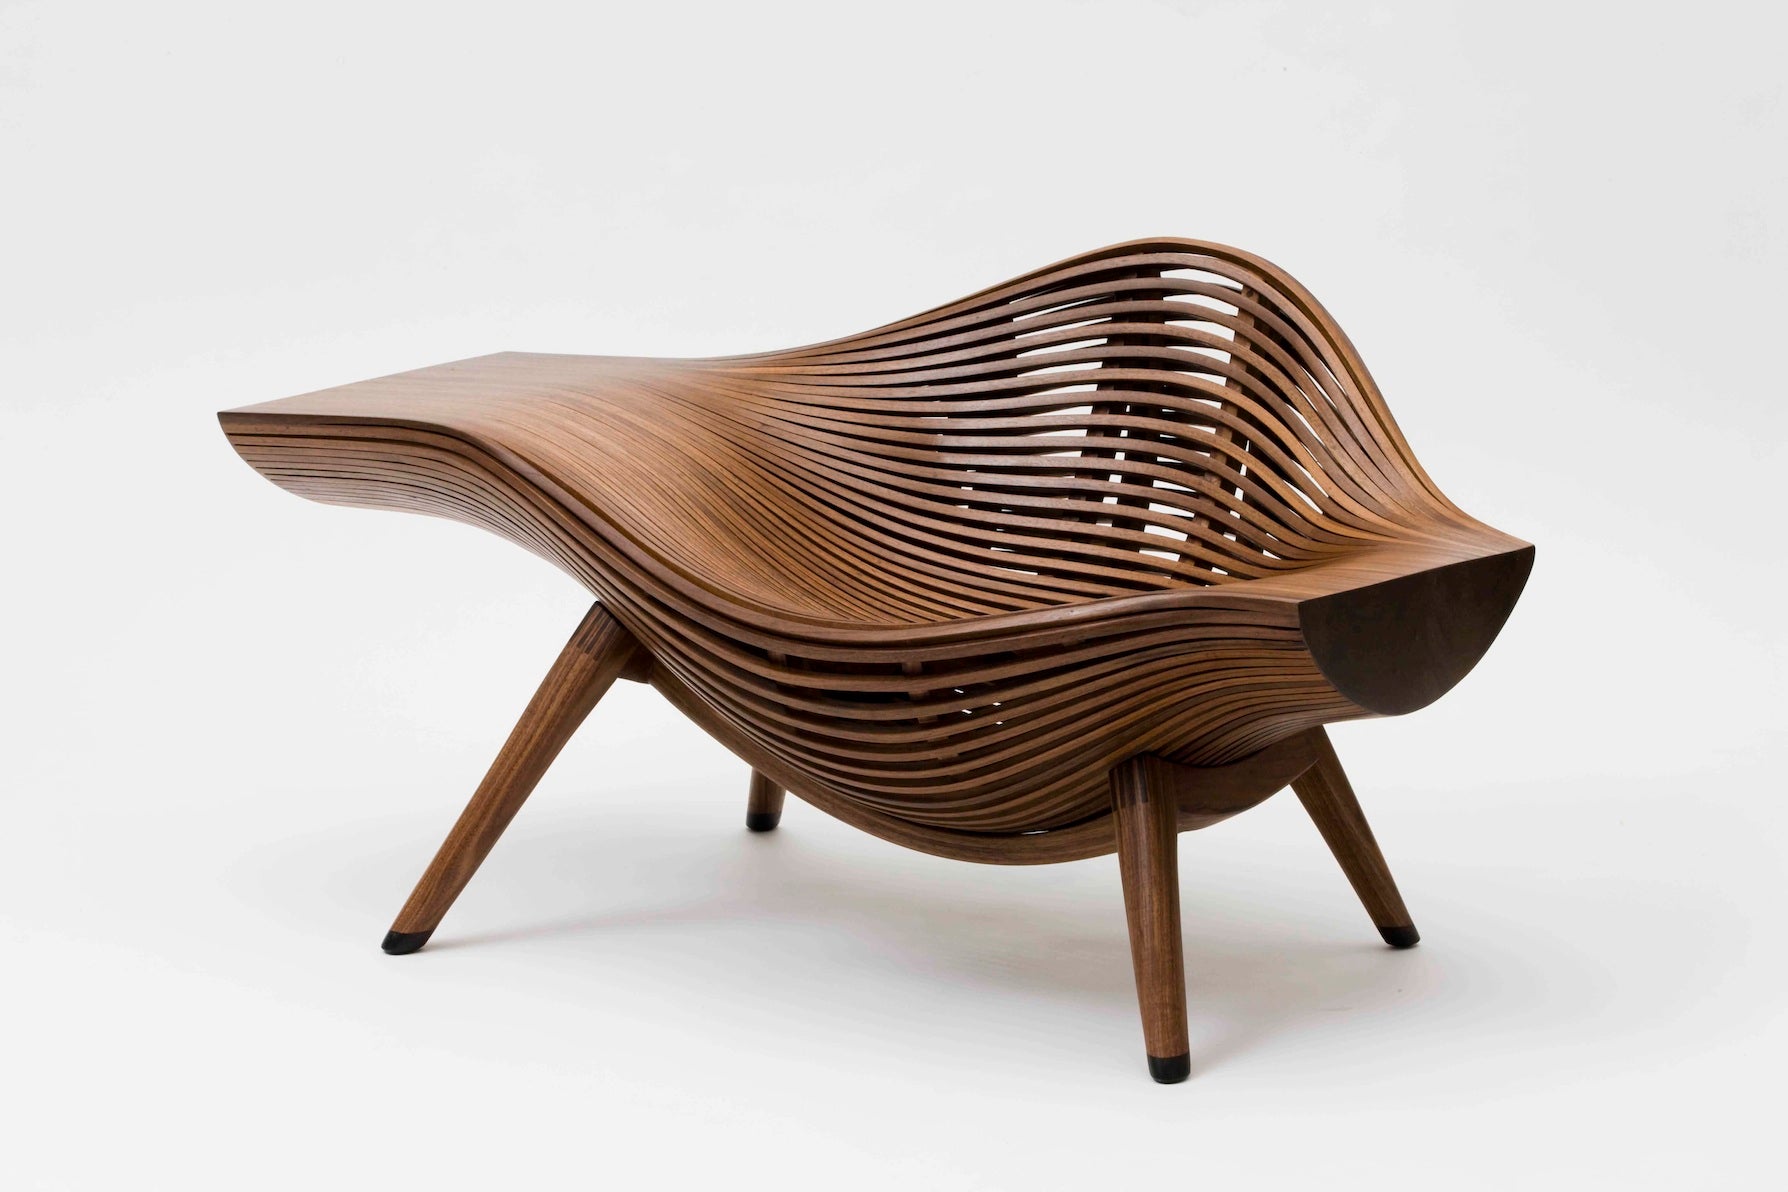 "Steam 11" lounge chair by Bae Sehwa